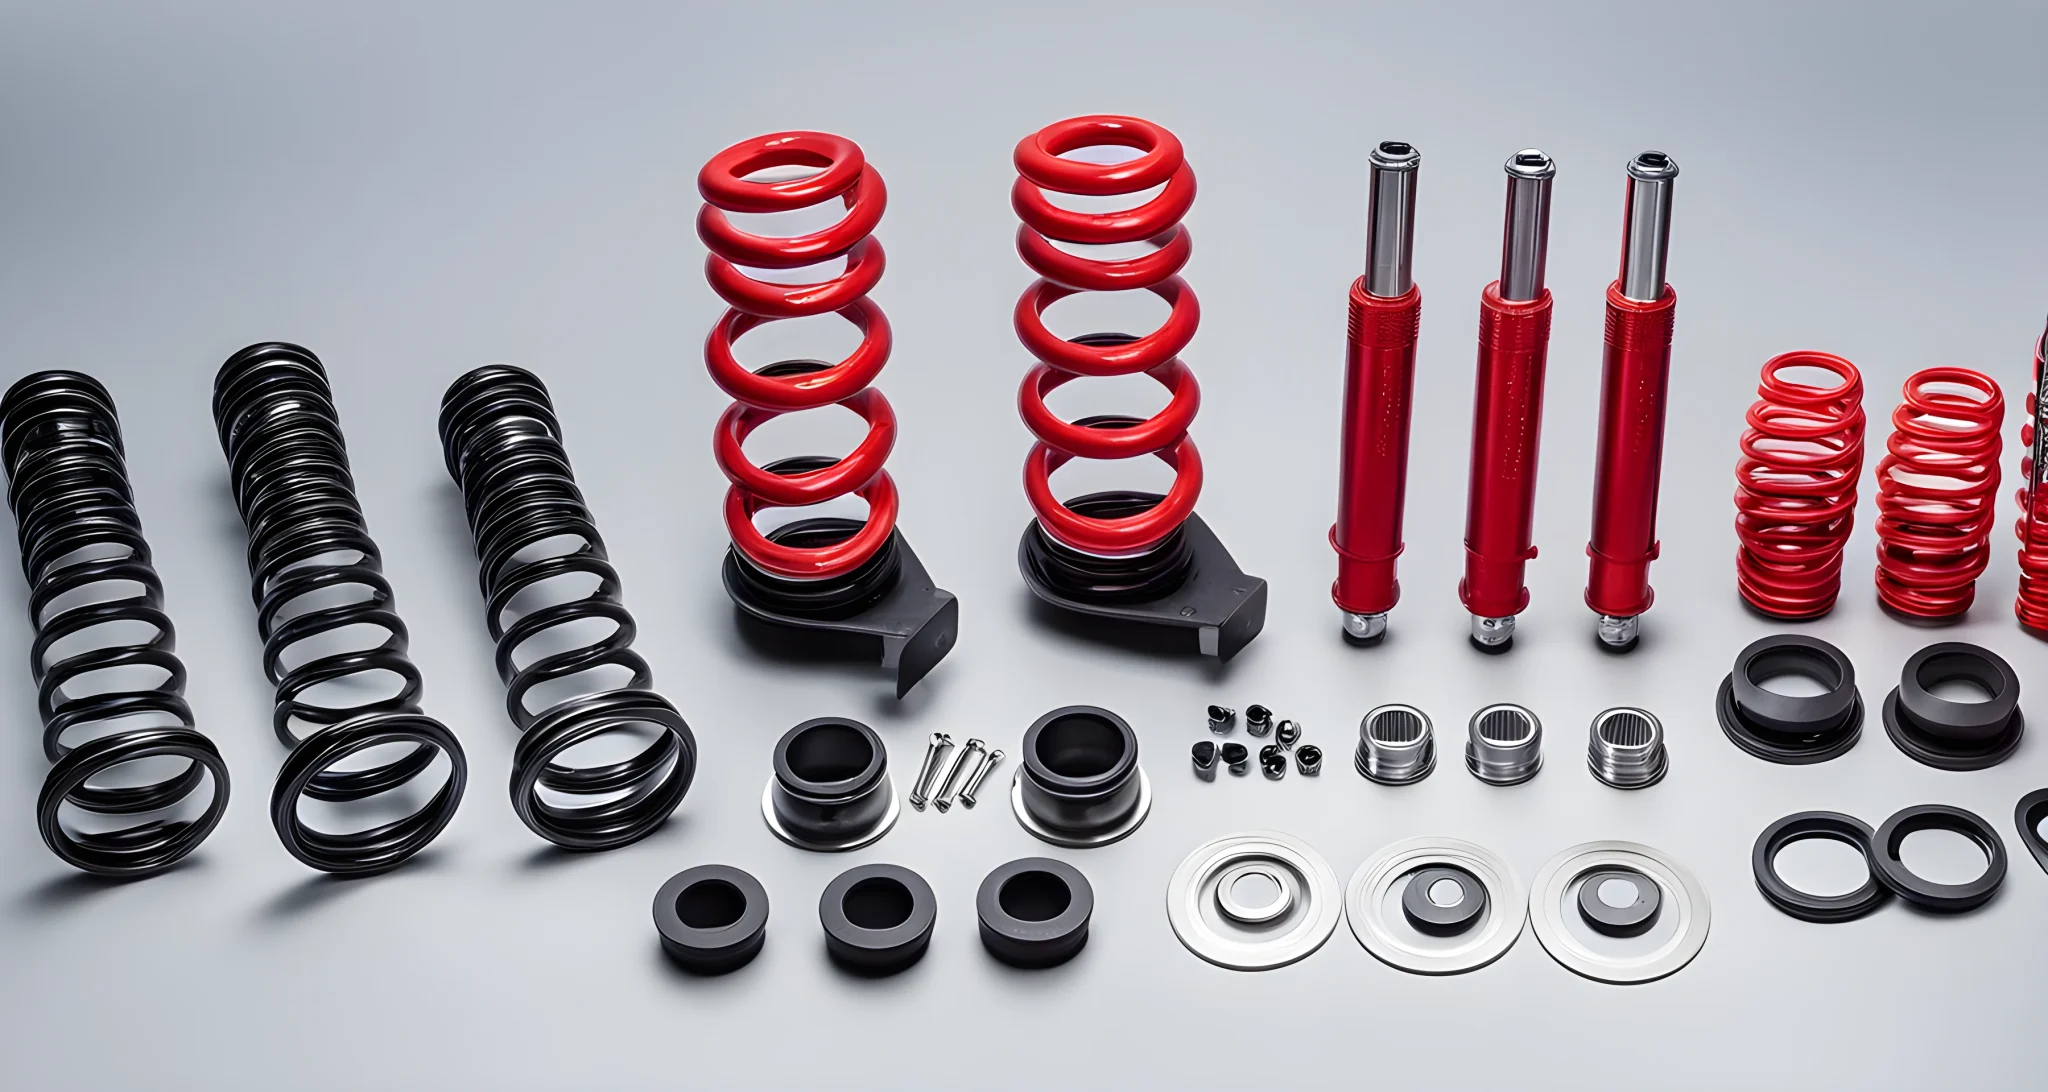 The image shows a set of aftermarket coilover suspension parts for an Audi vehicle.